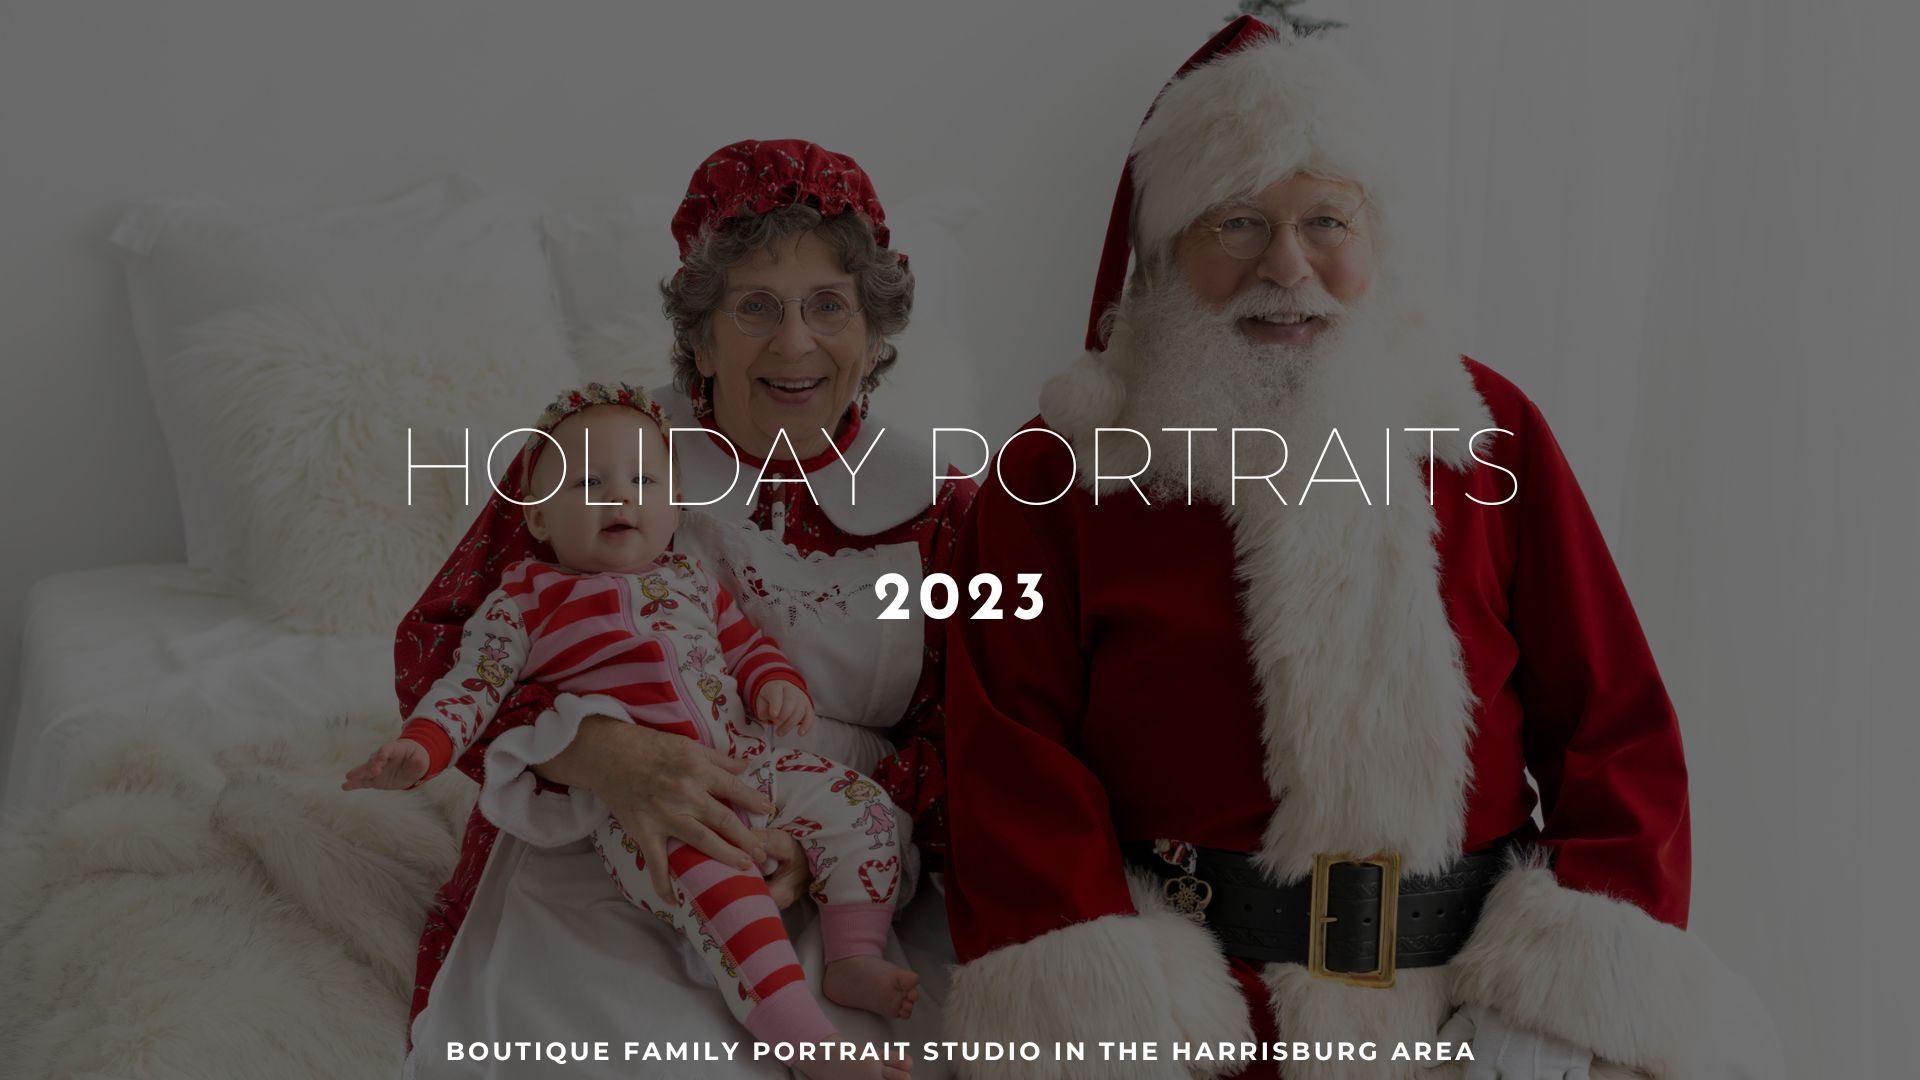 Holiday portraits 2023 featured